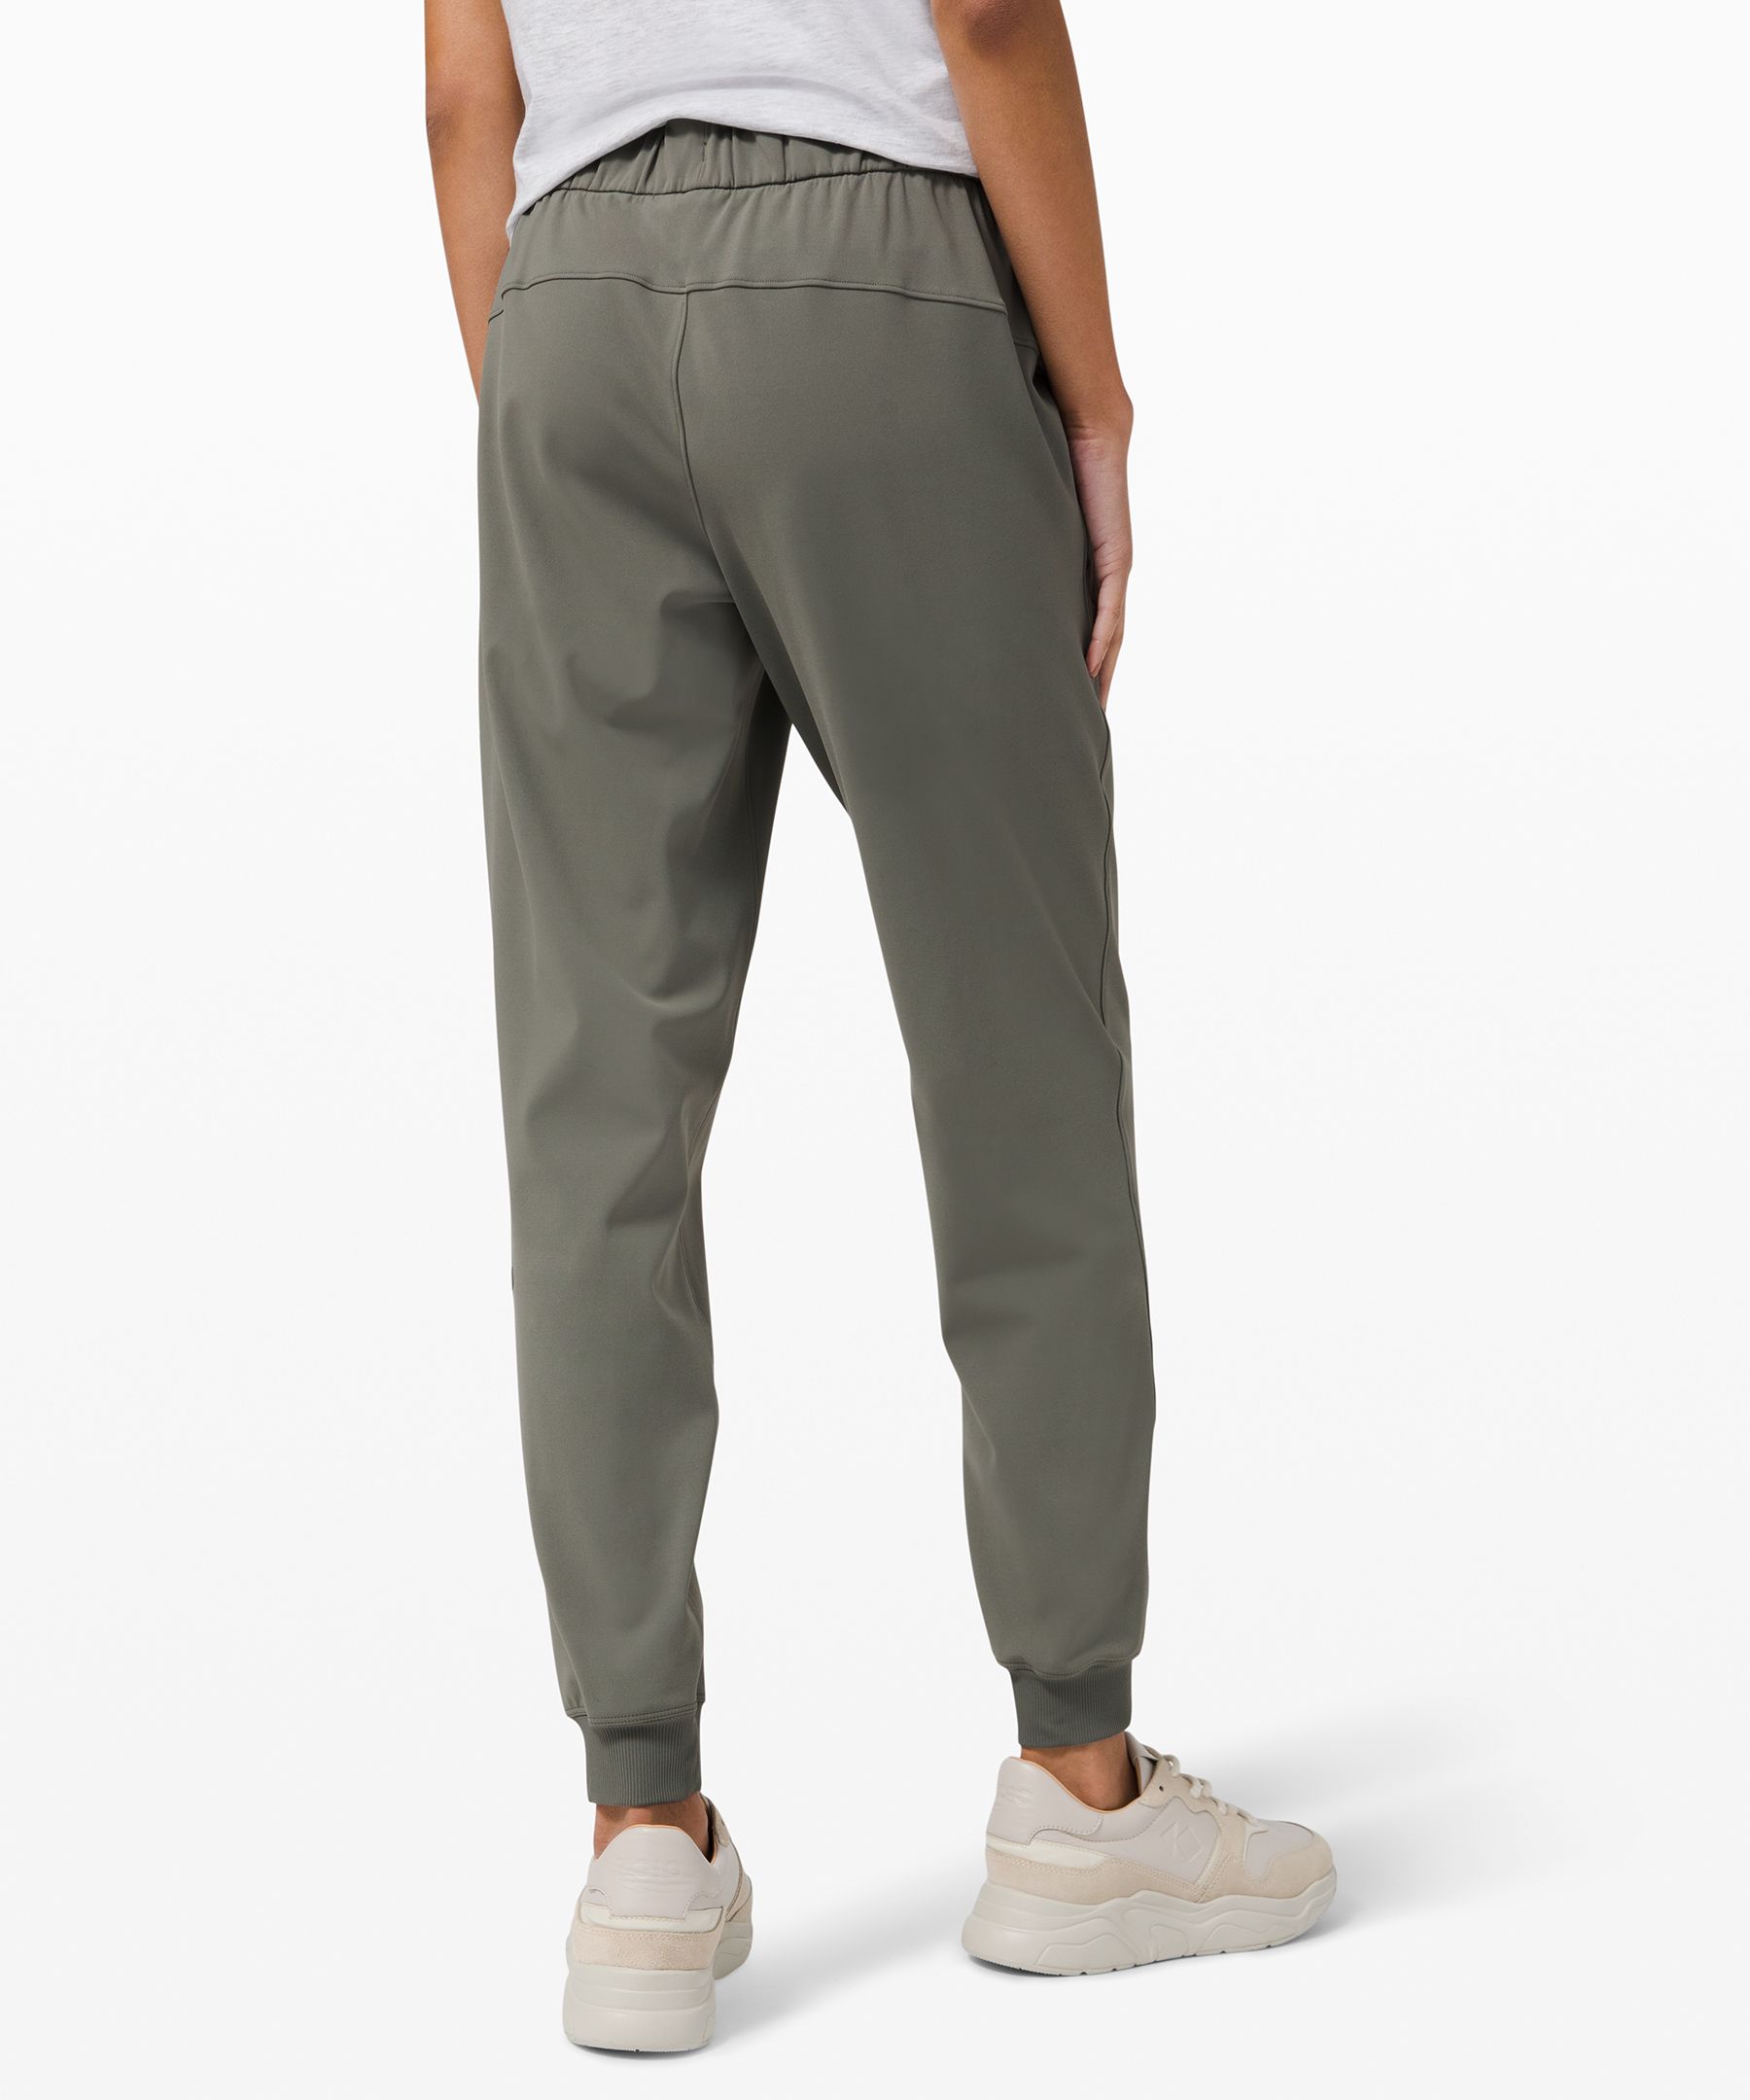 On the Fly Joggers by Lululemon for $30